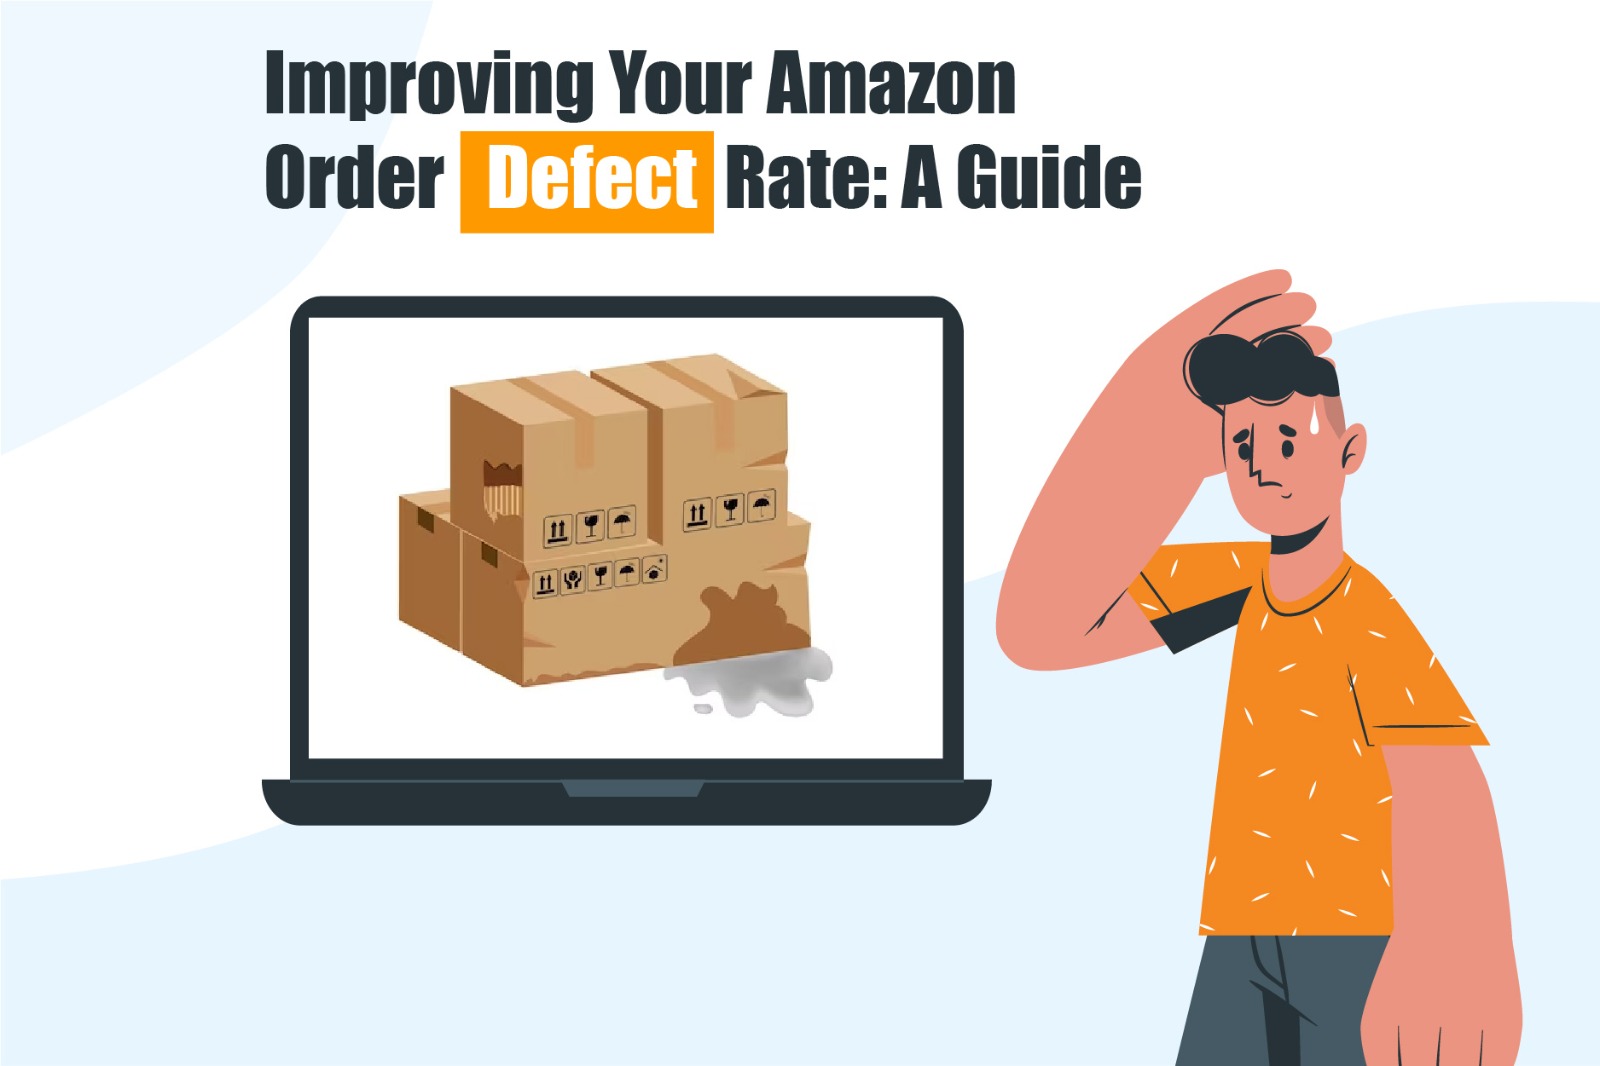 Improving Your Amazon Order Defect Rate A Guide